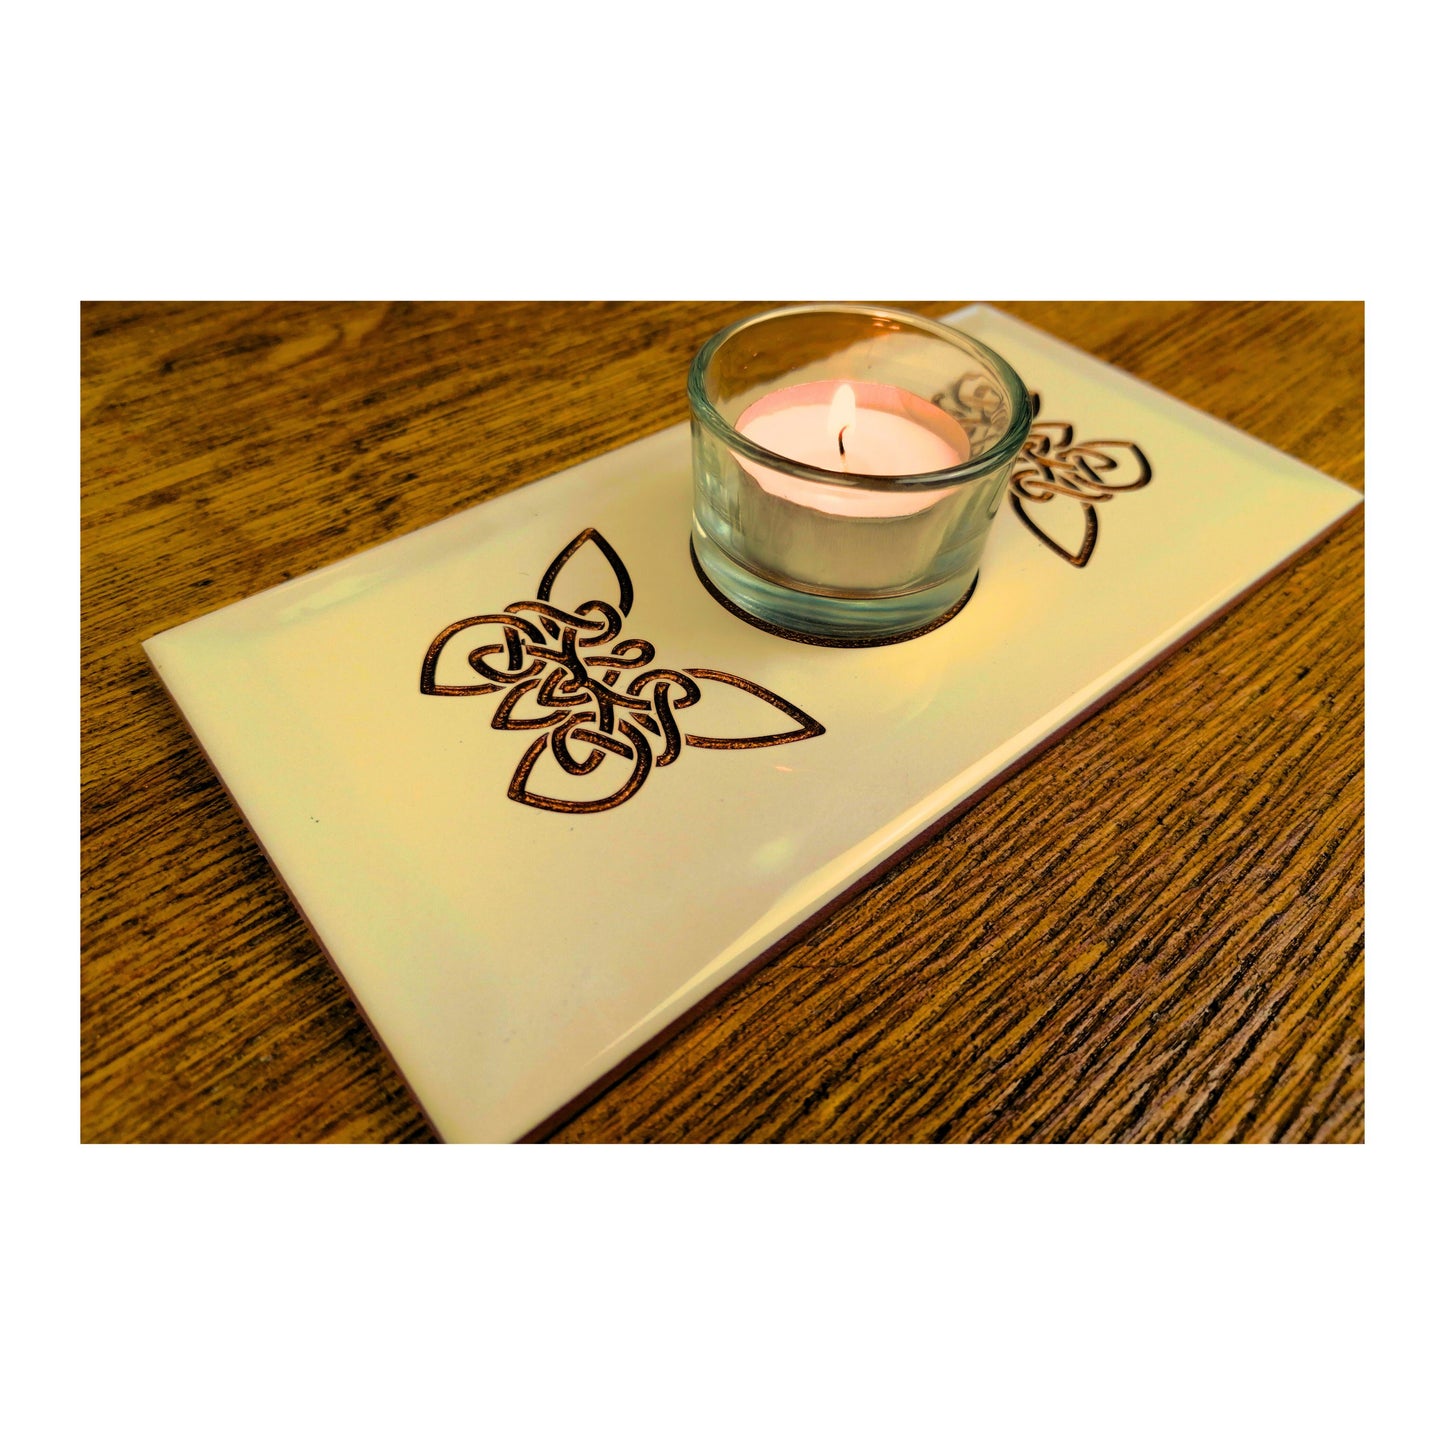 Handmade Tealight Candle Holder | Deep Engraved Ceramic Tile | Unique Gift Idea | Made In Ireland | Gold Copper Silver | Modern Home Decor